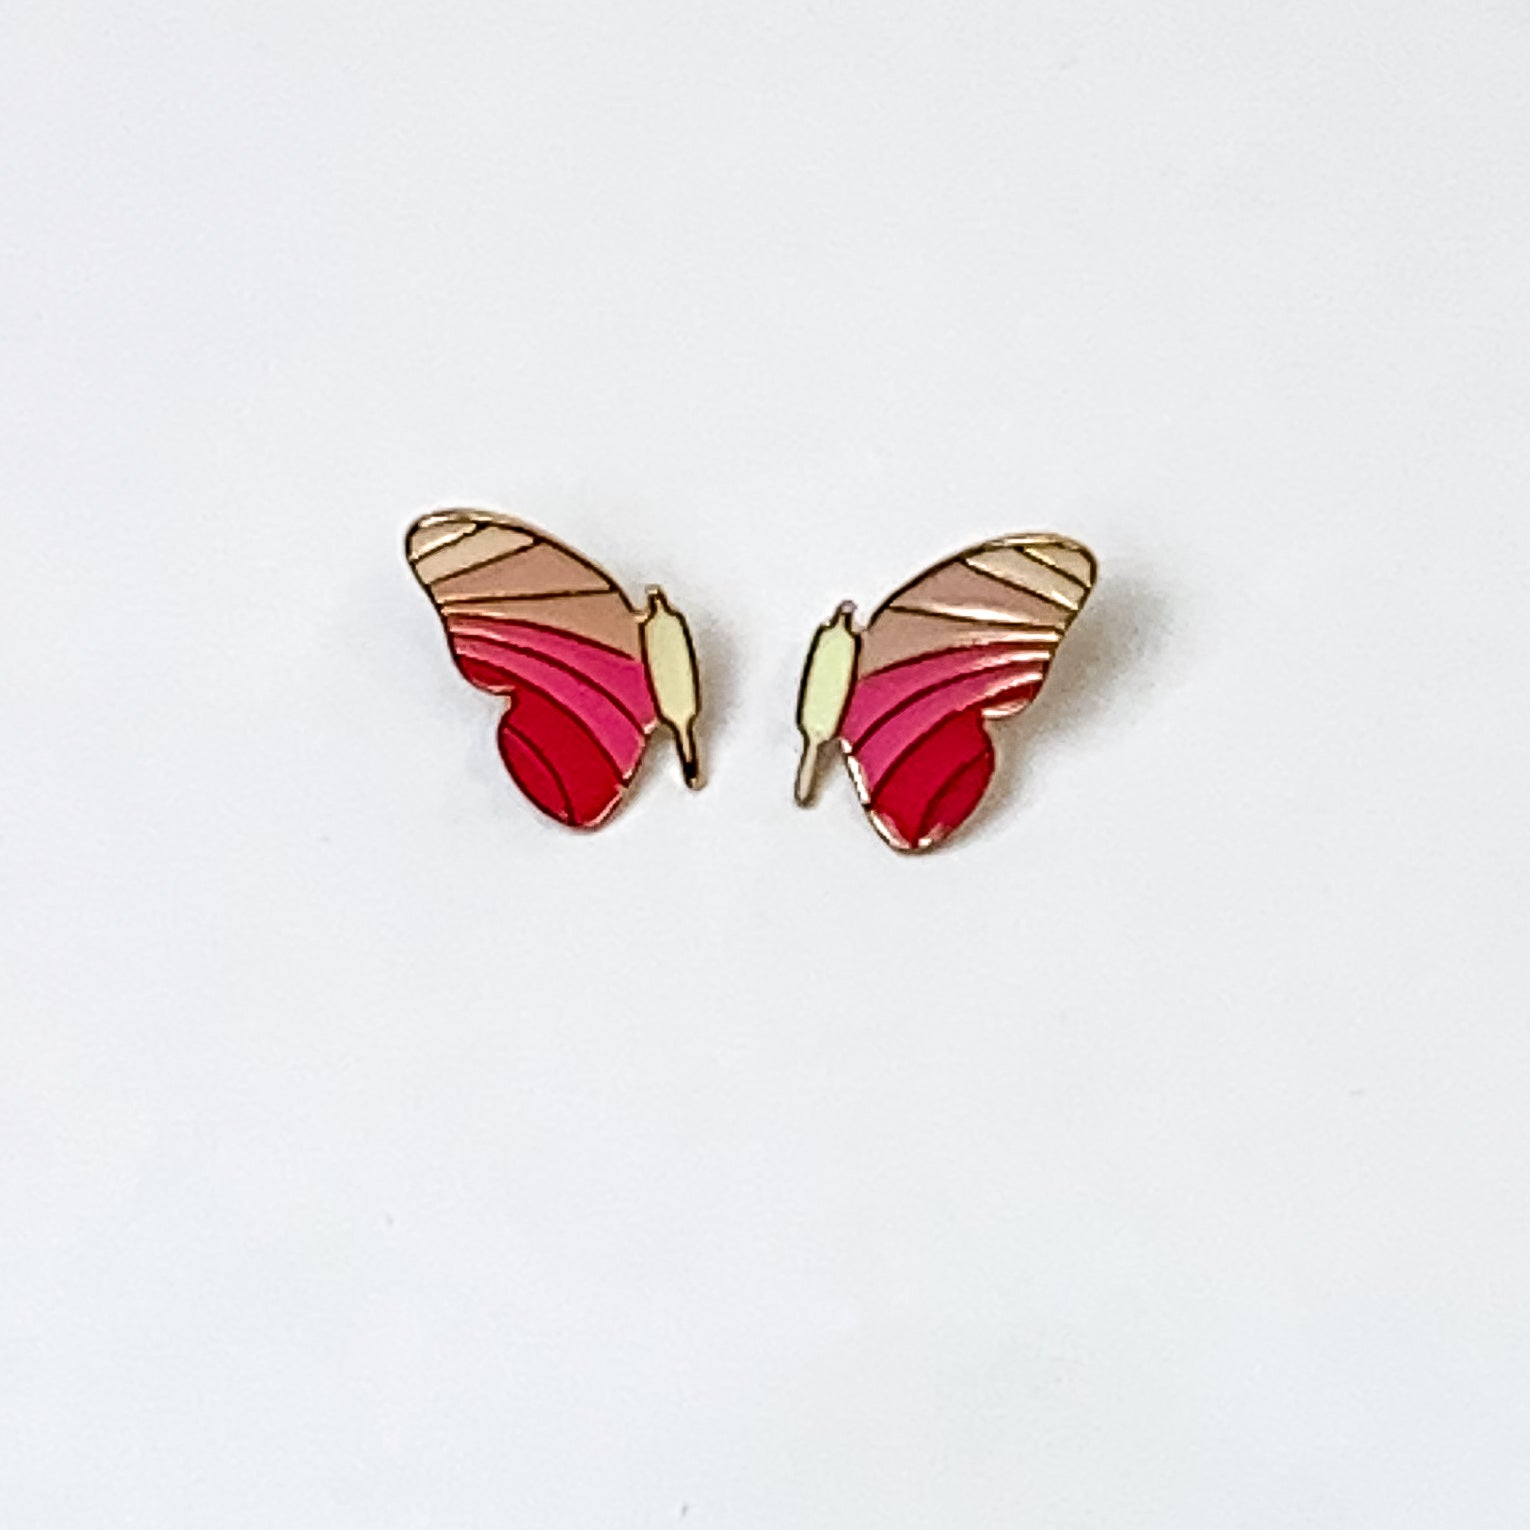 Butterfly Wing Stud Earrings in Pink - Giddy Up Glamour Boutique